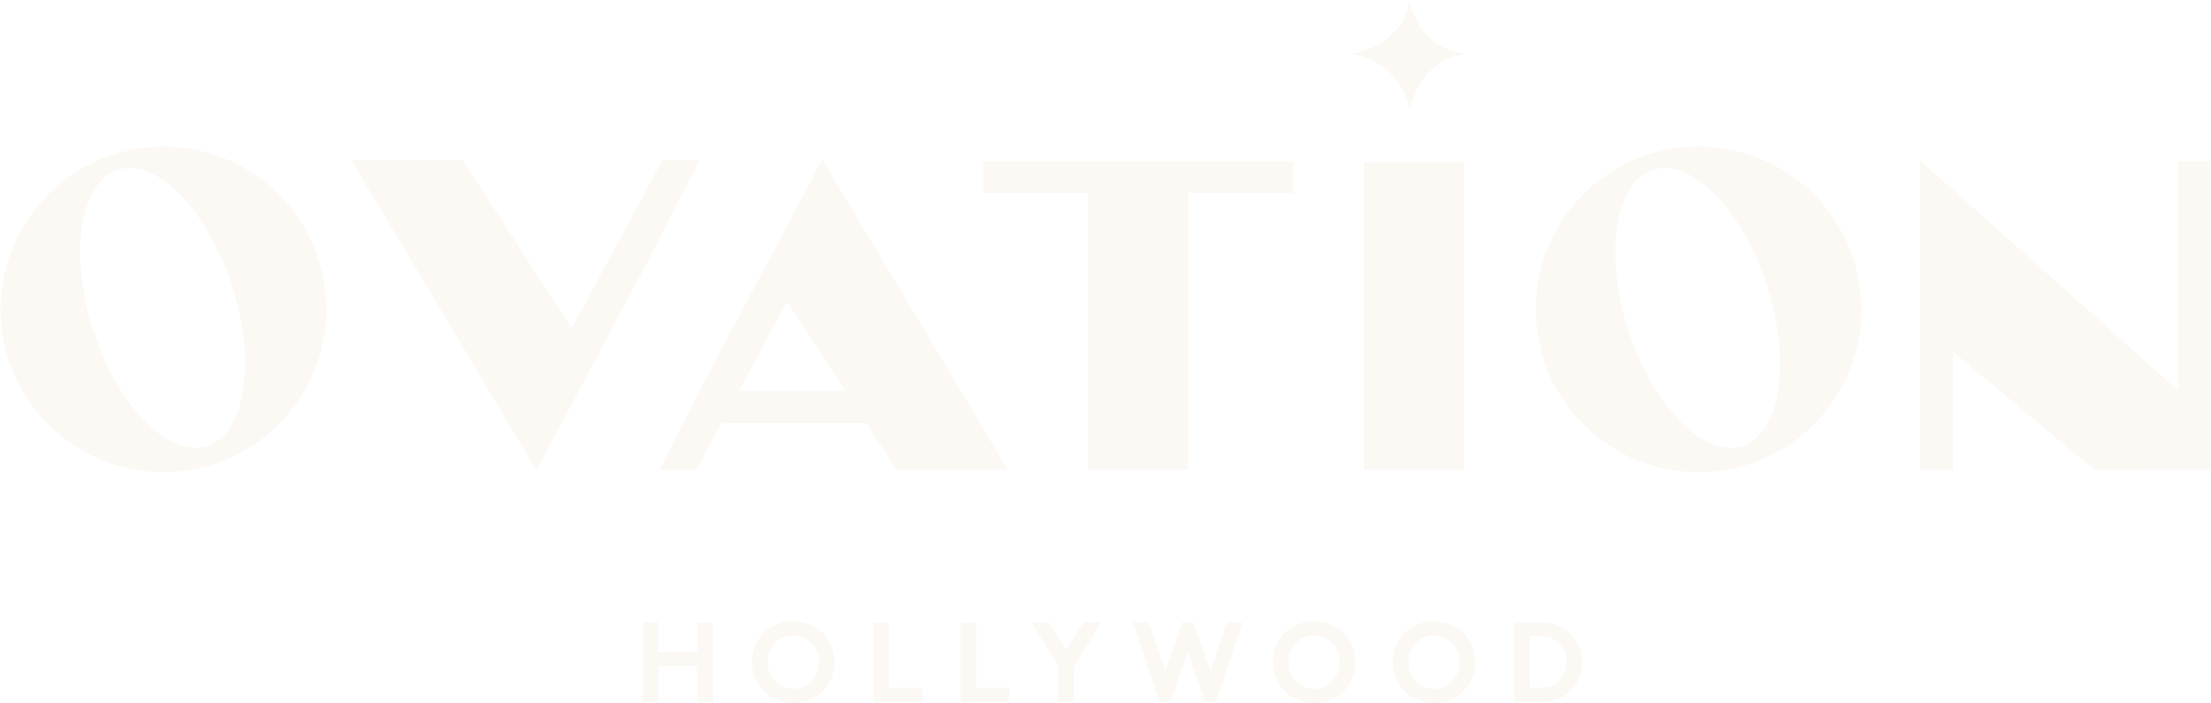 ovation_hollywood_lockup_logo_cream_trimmed.png